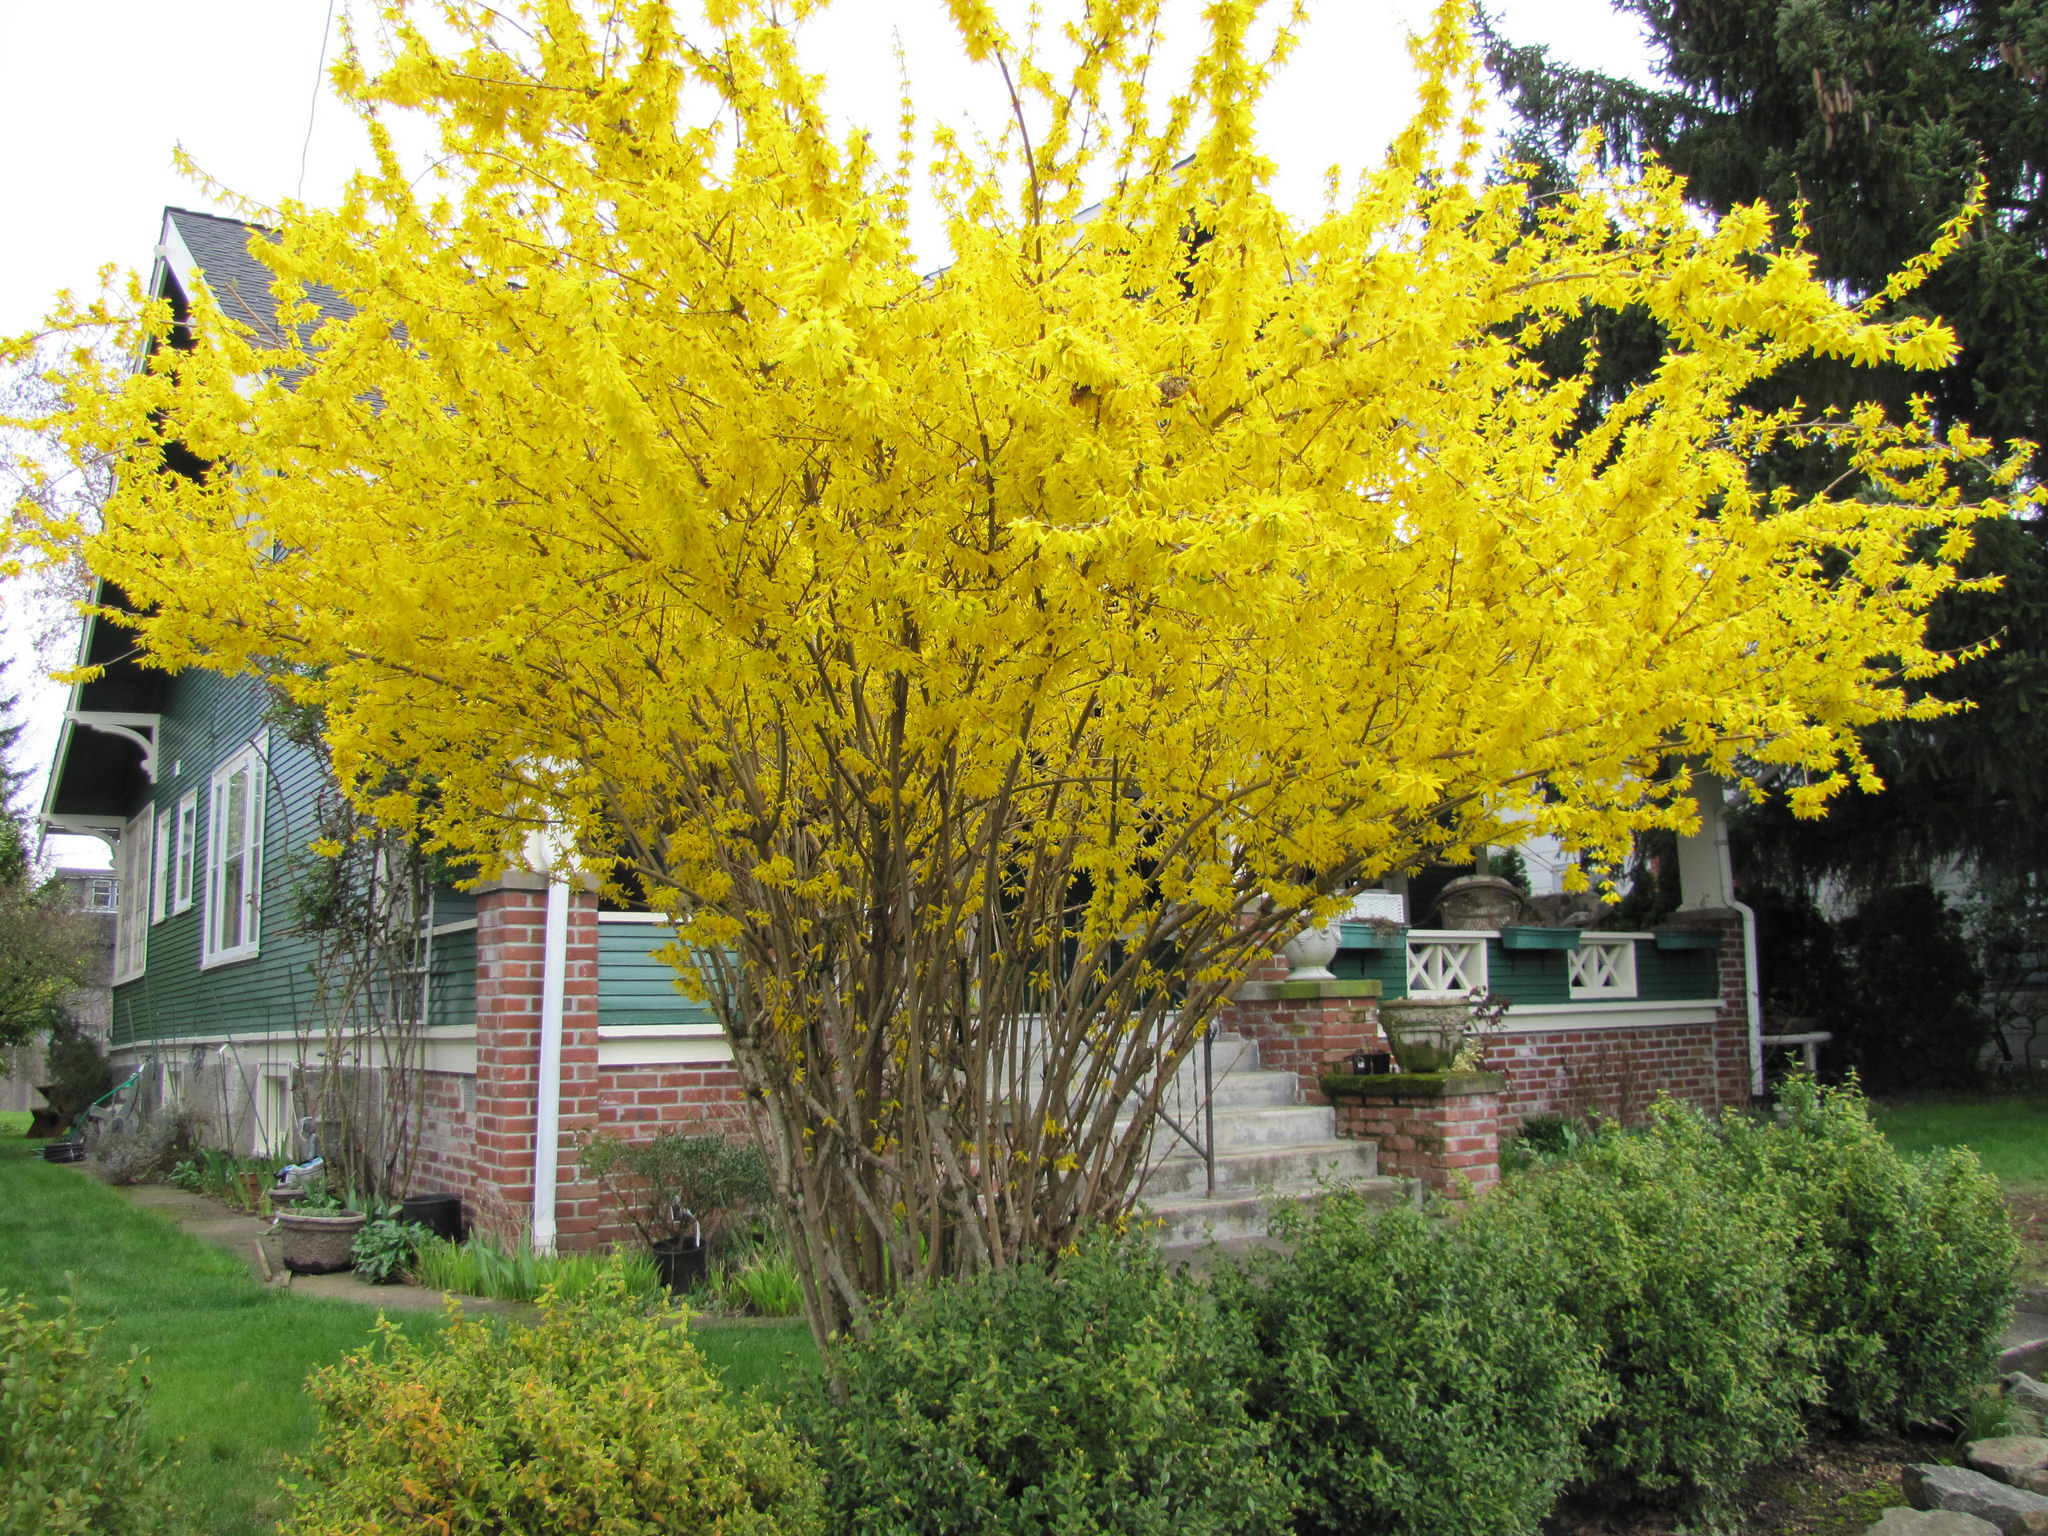 A spring-blooming shrub like forsythia should be pruned after it flowers so that the following year it lives up to its potential.